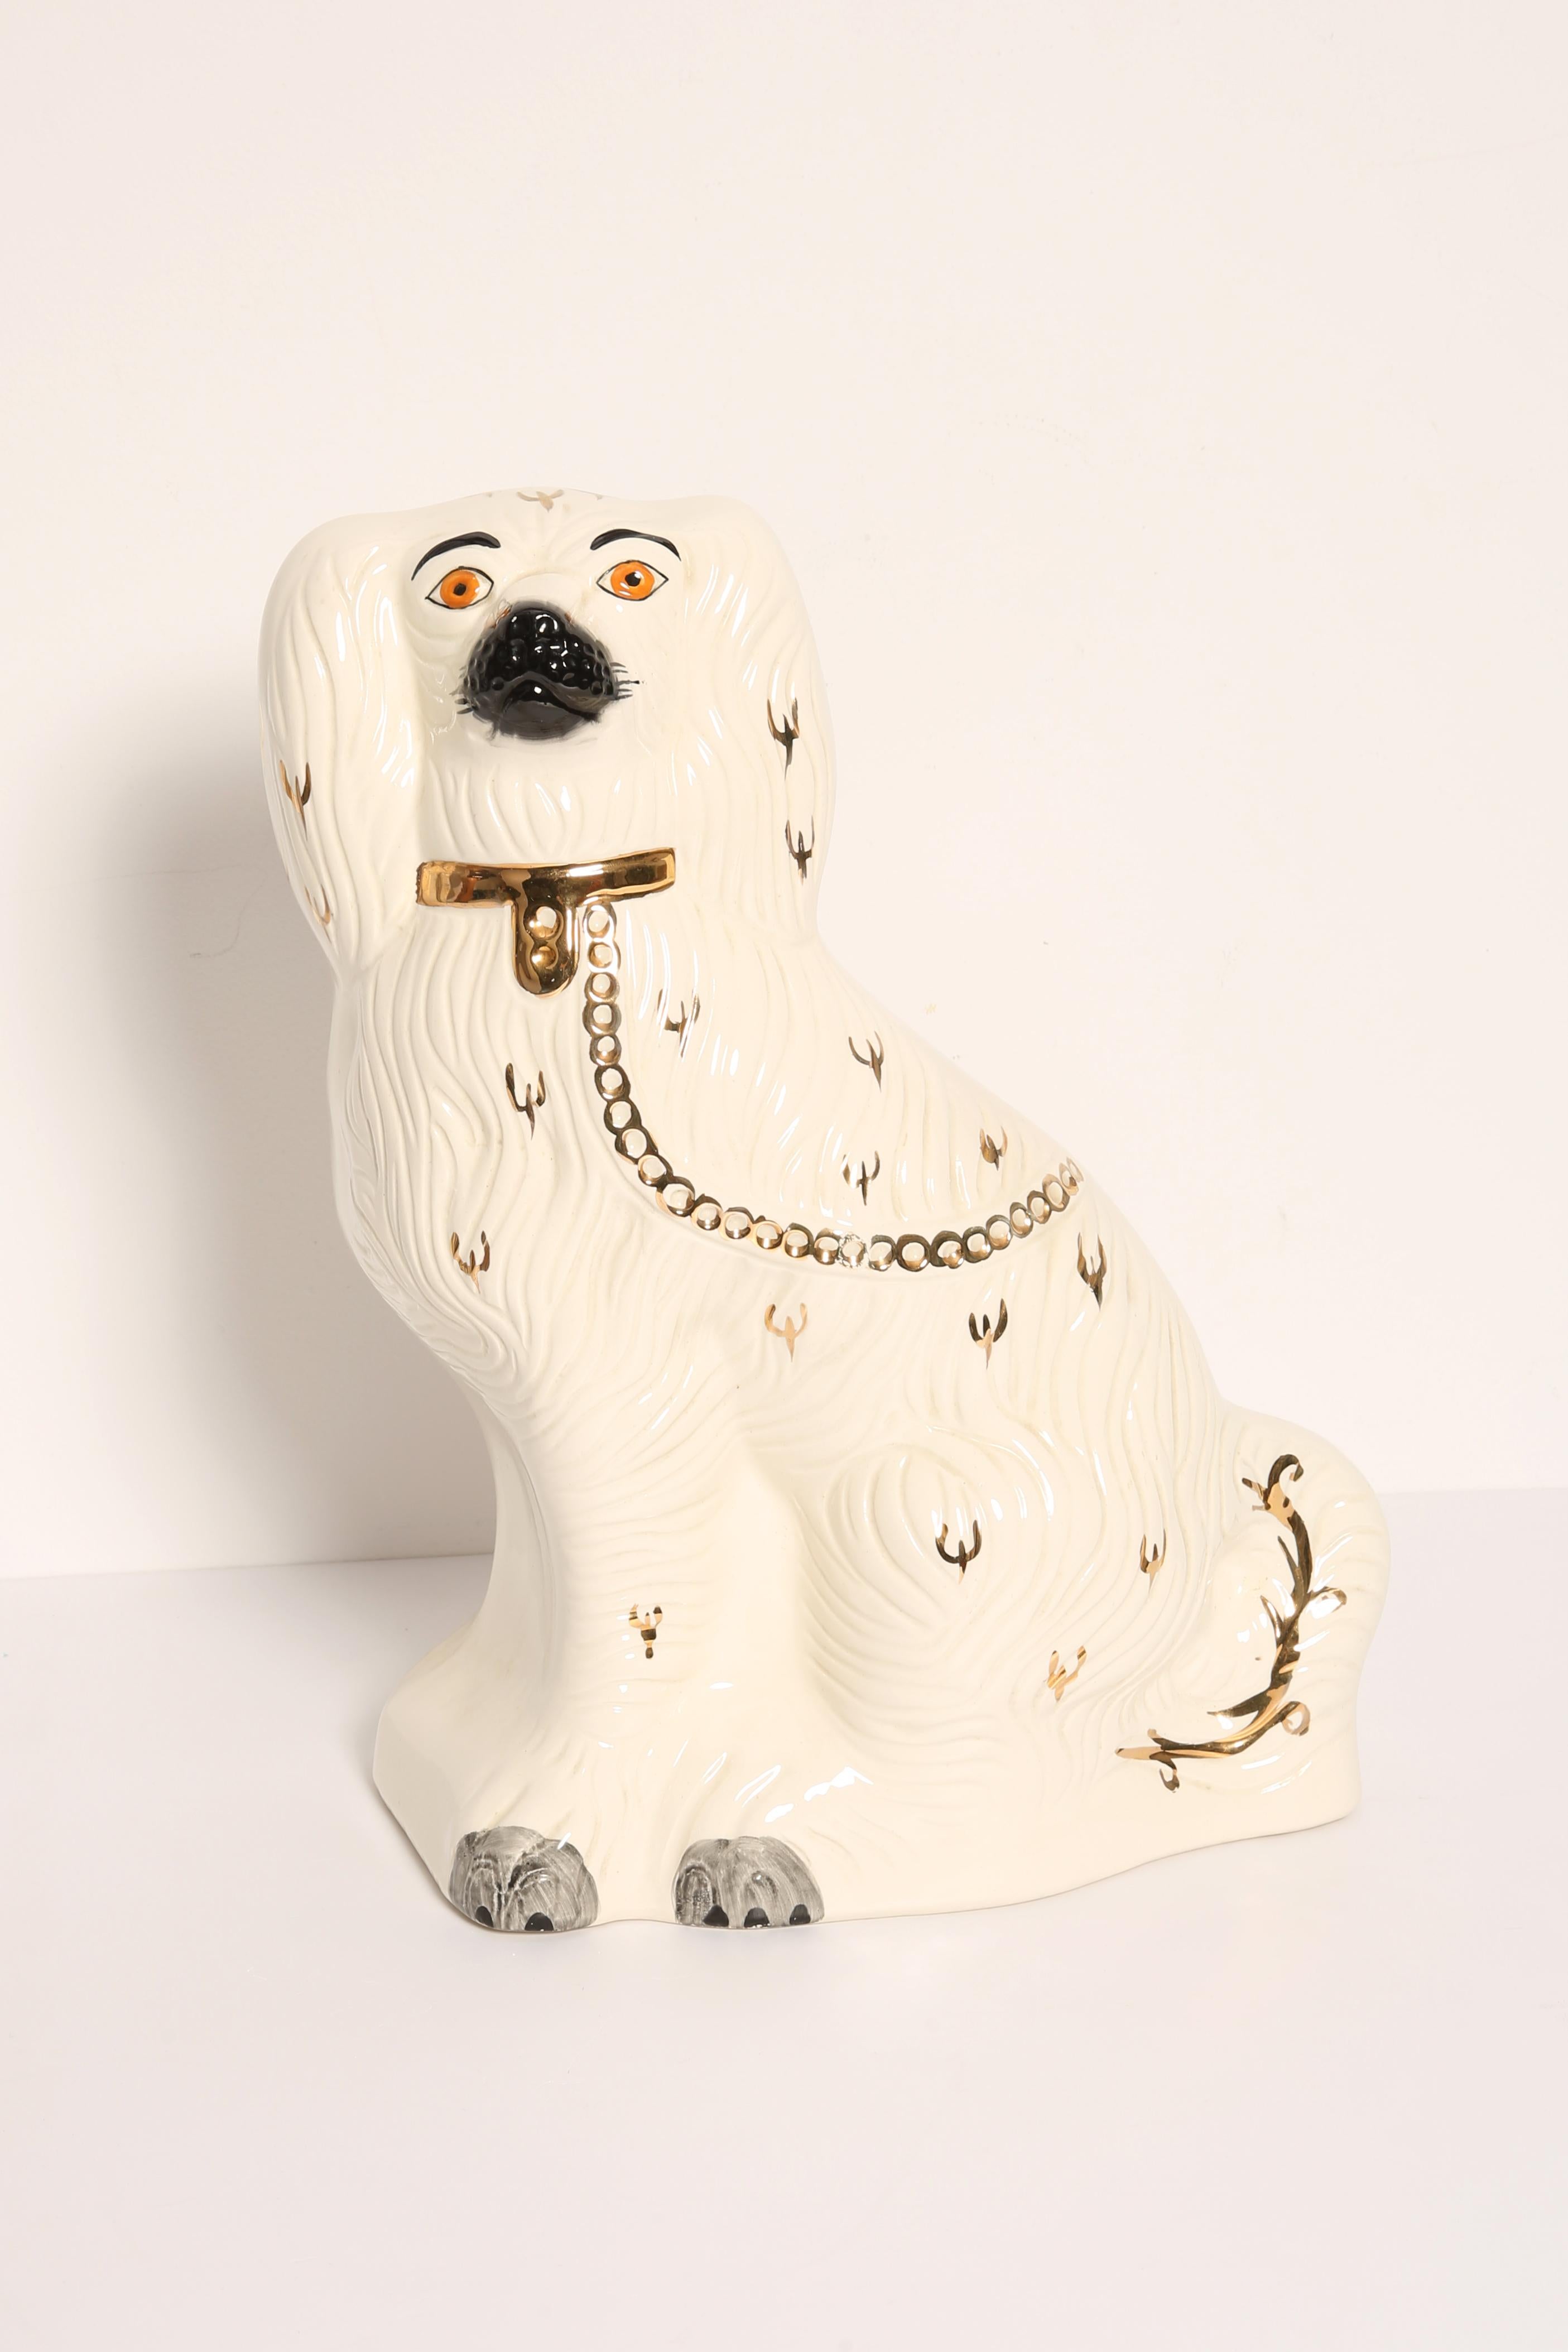 Painted ceramic, good original vintage condition. Beautiful and unique decorative sculpture. Yorkshire Dog Sculpture was produced in Staffordshire, England in 1960s.